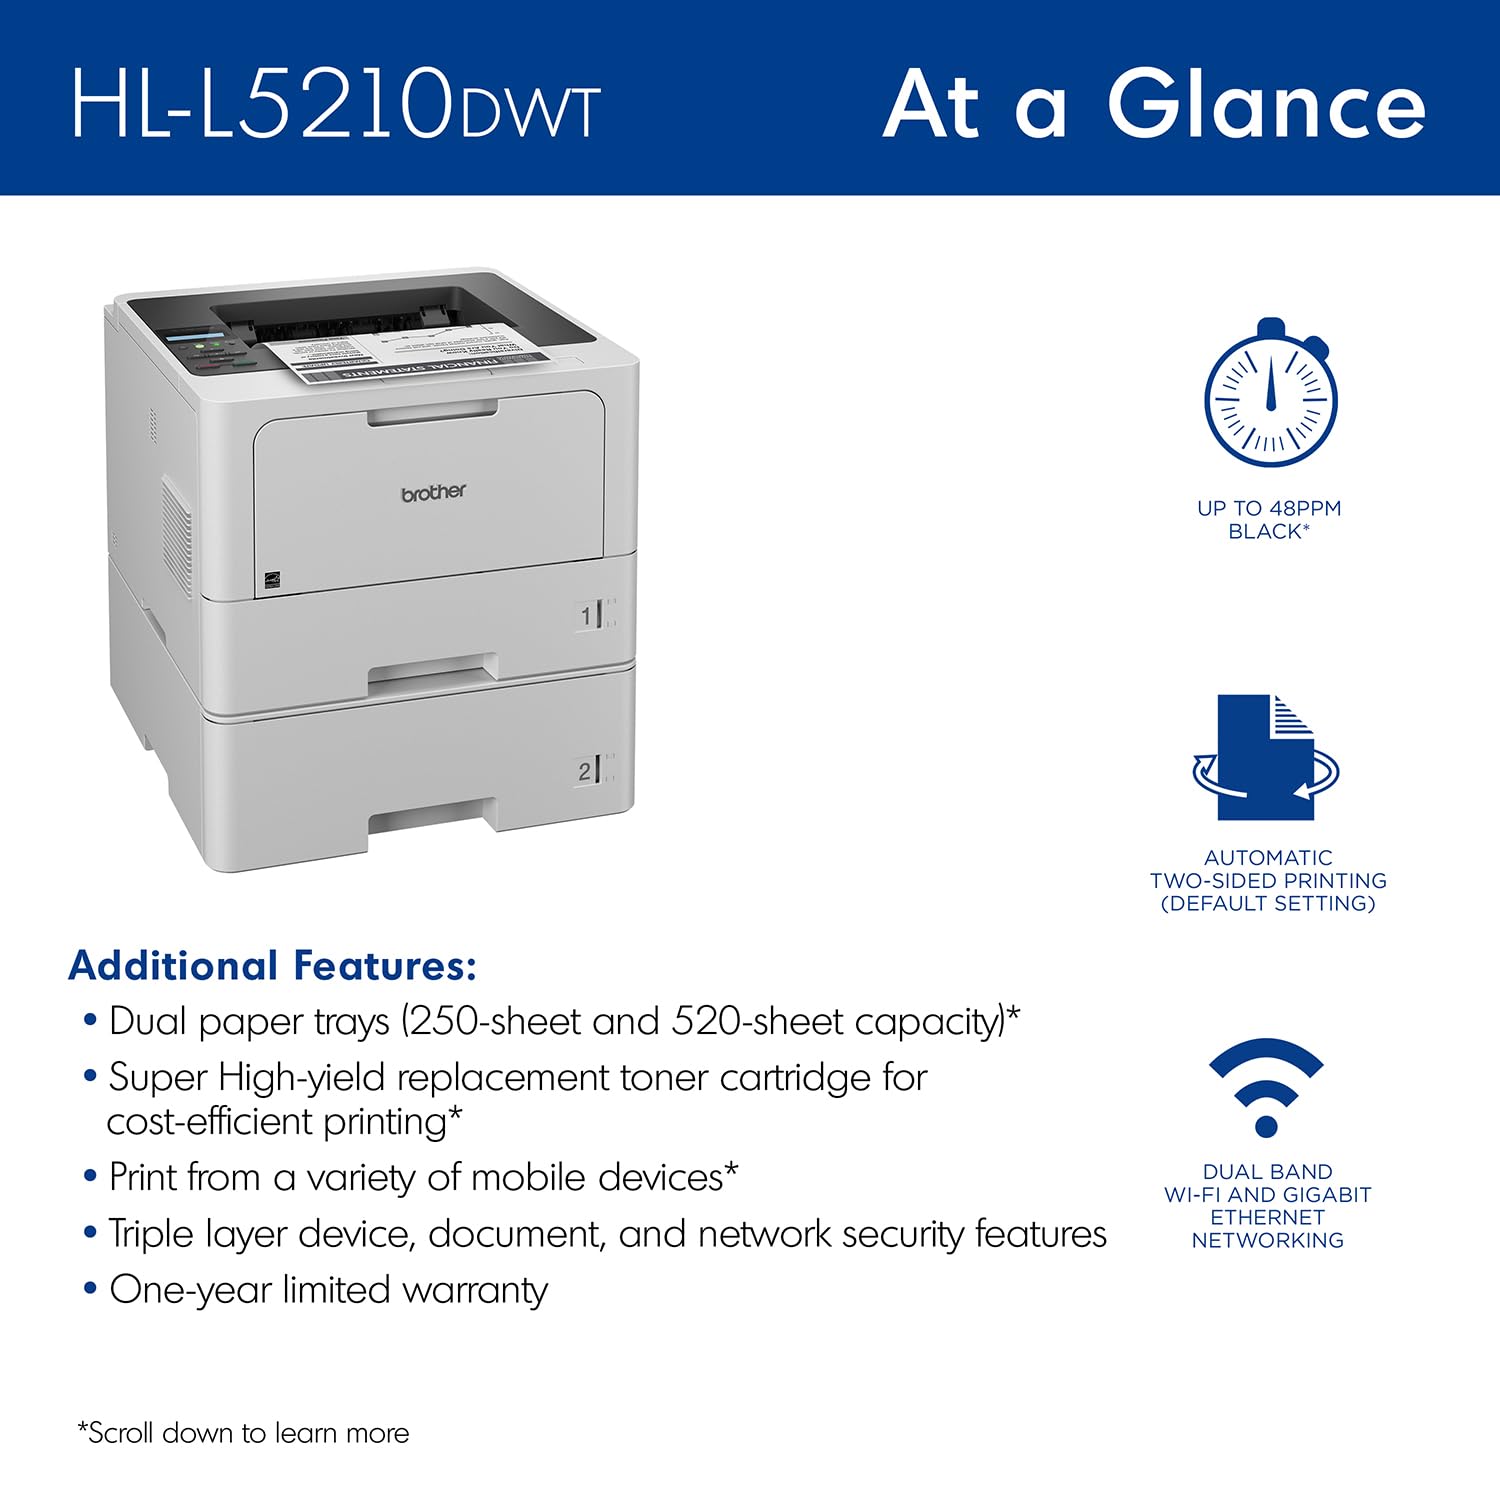 Brother HL-L5210DWT Business Monochrome Laser Printer with Dual Trays, Wireless and Gigabit Ethernet Networking, Duplex Printing, Large Paper Capacity, and Mobile Printing